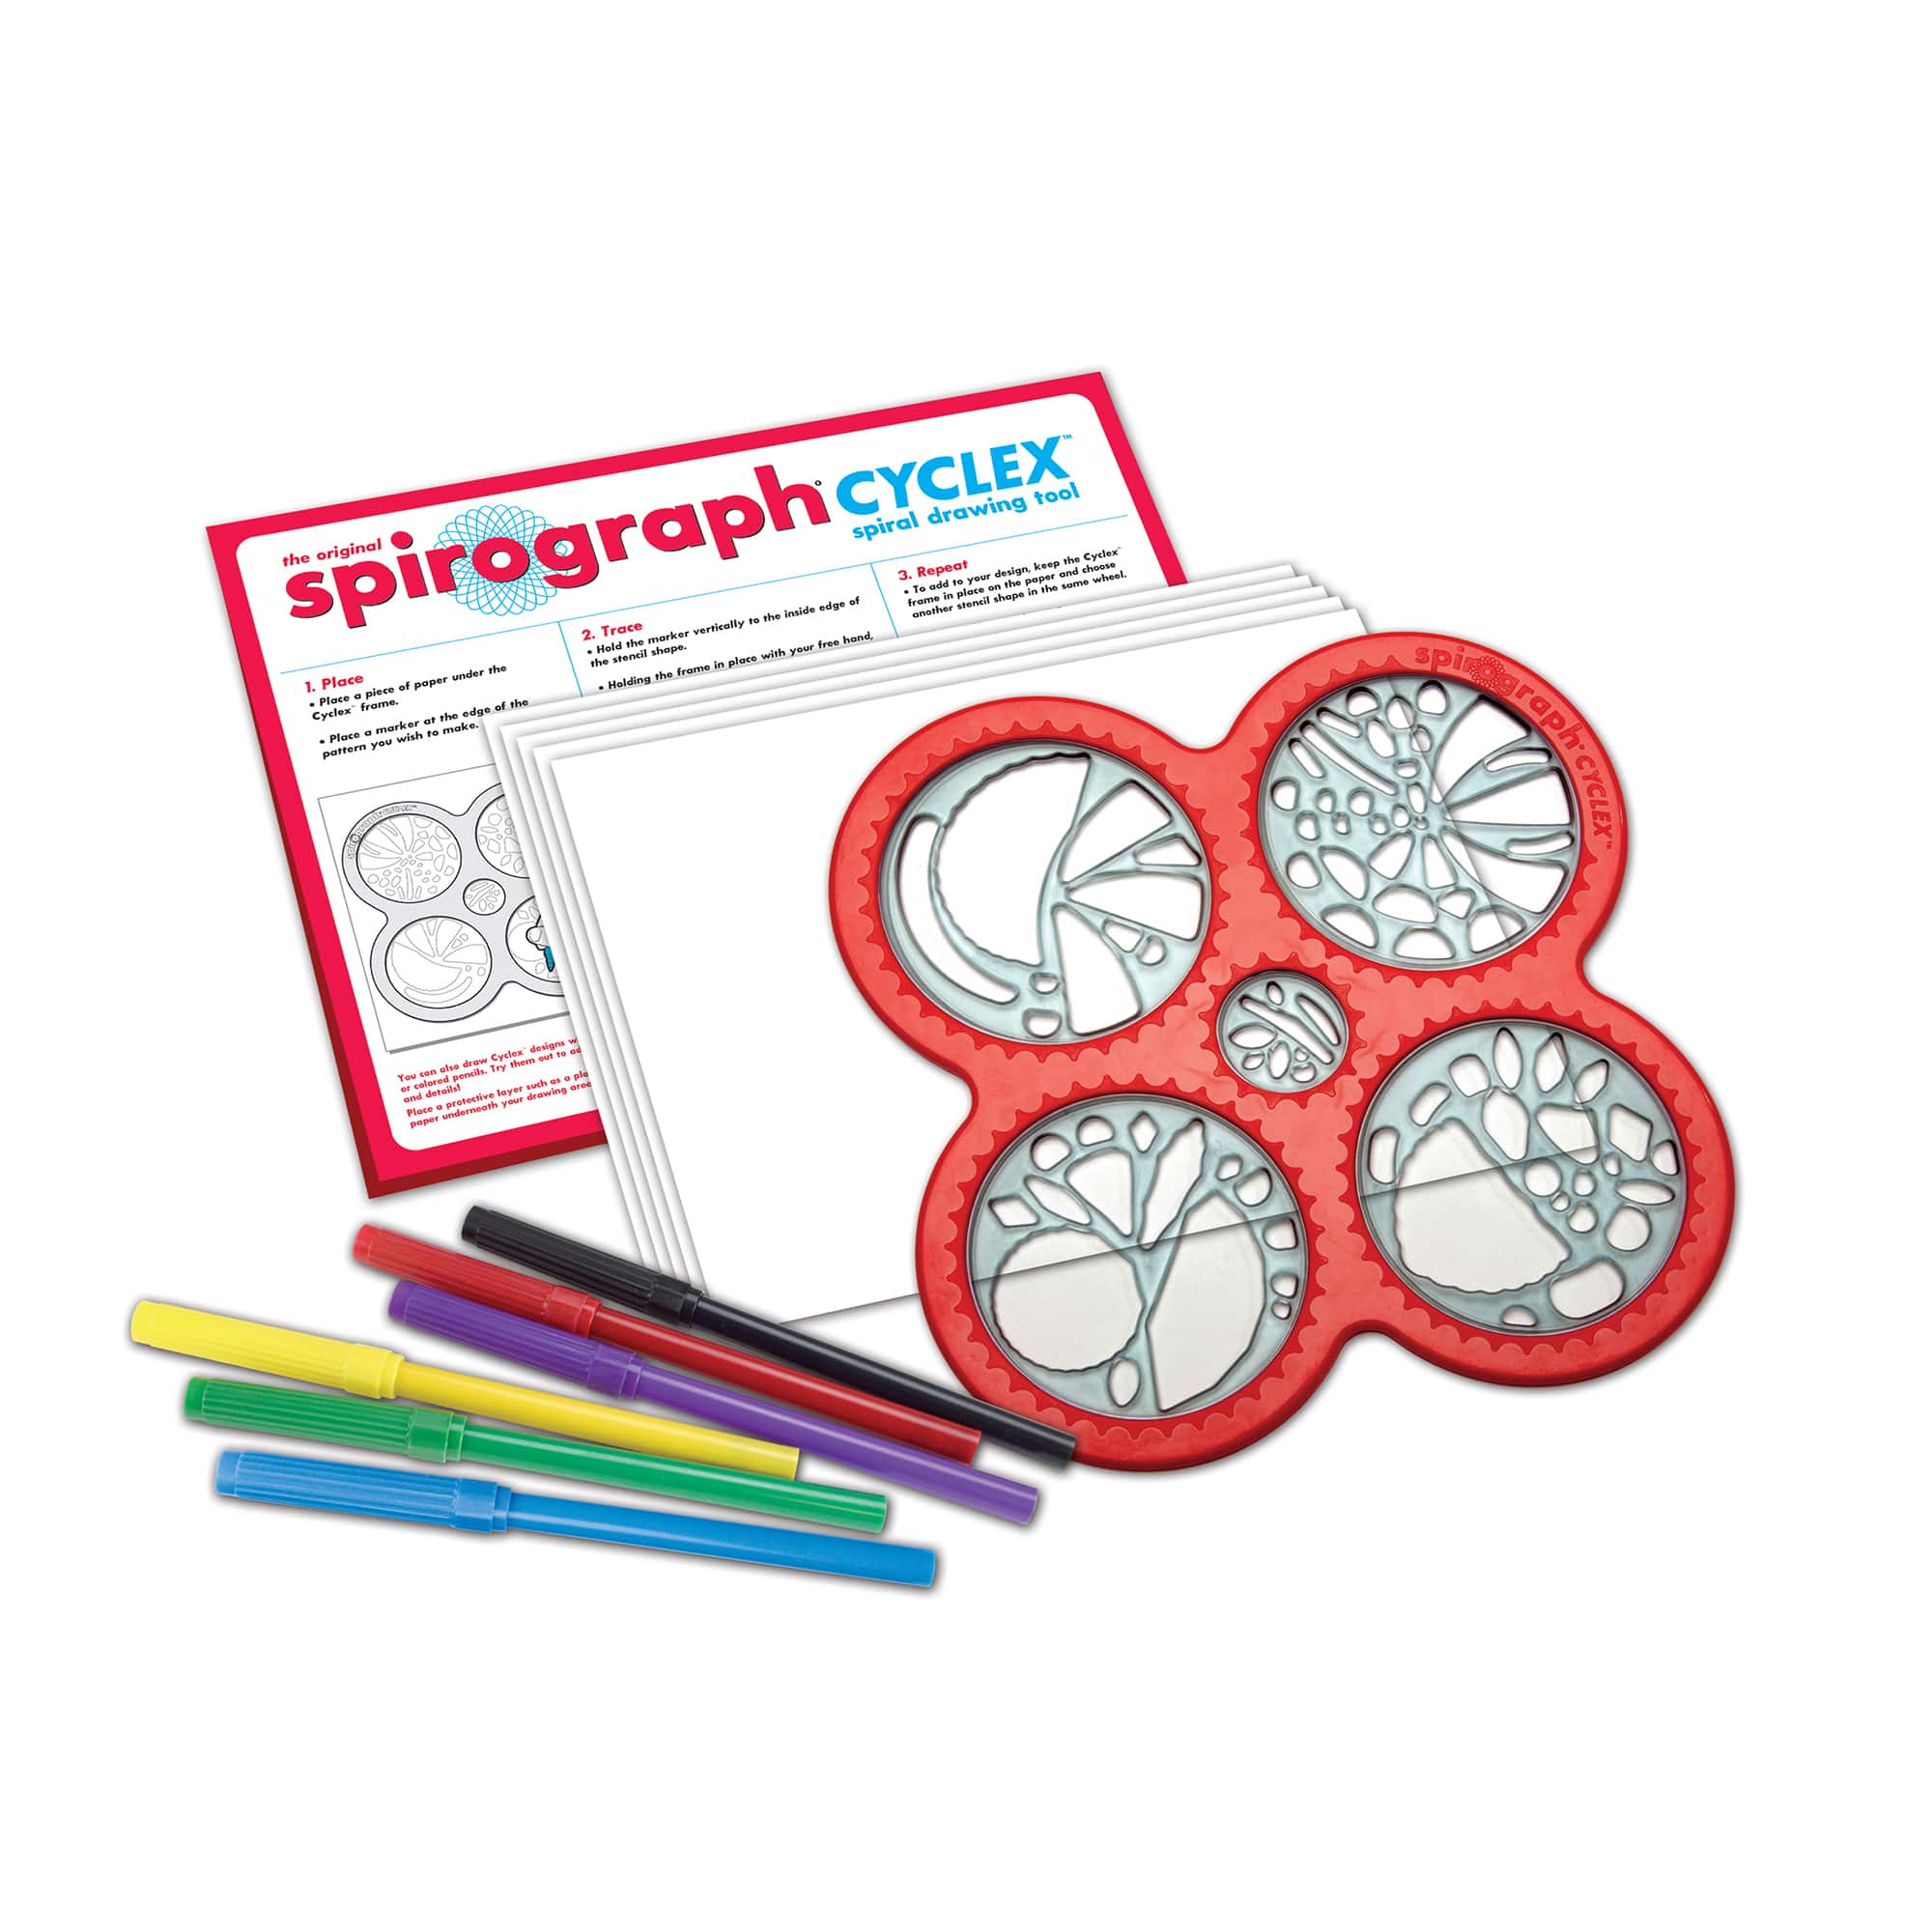 The Original Spirograph Drawing Set with Markers - Spirograph